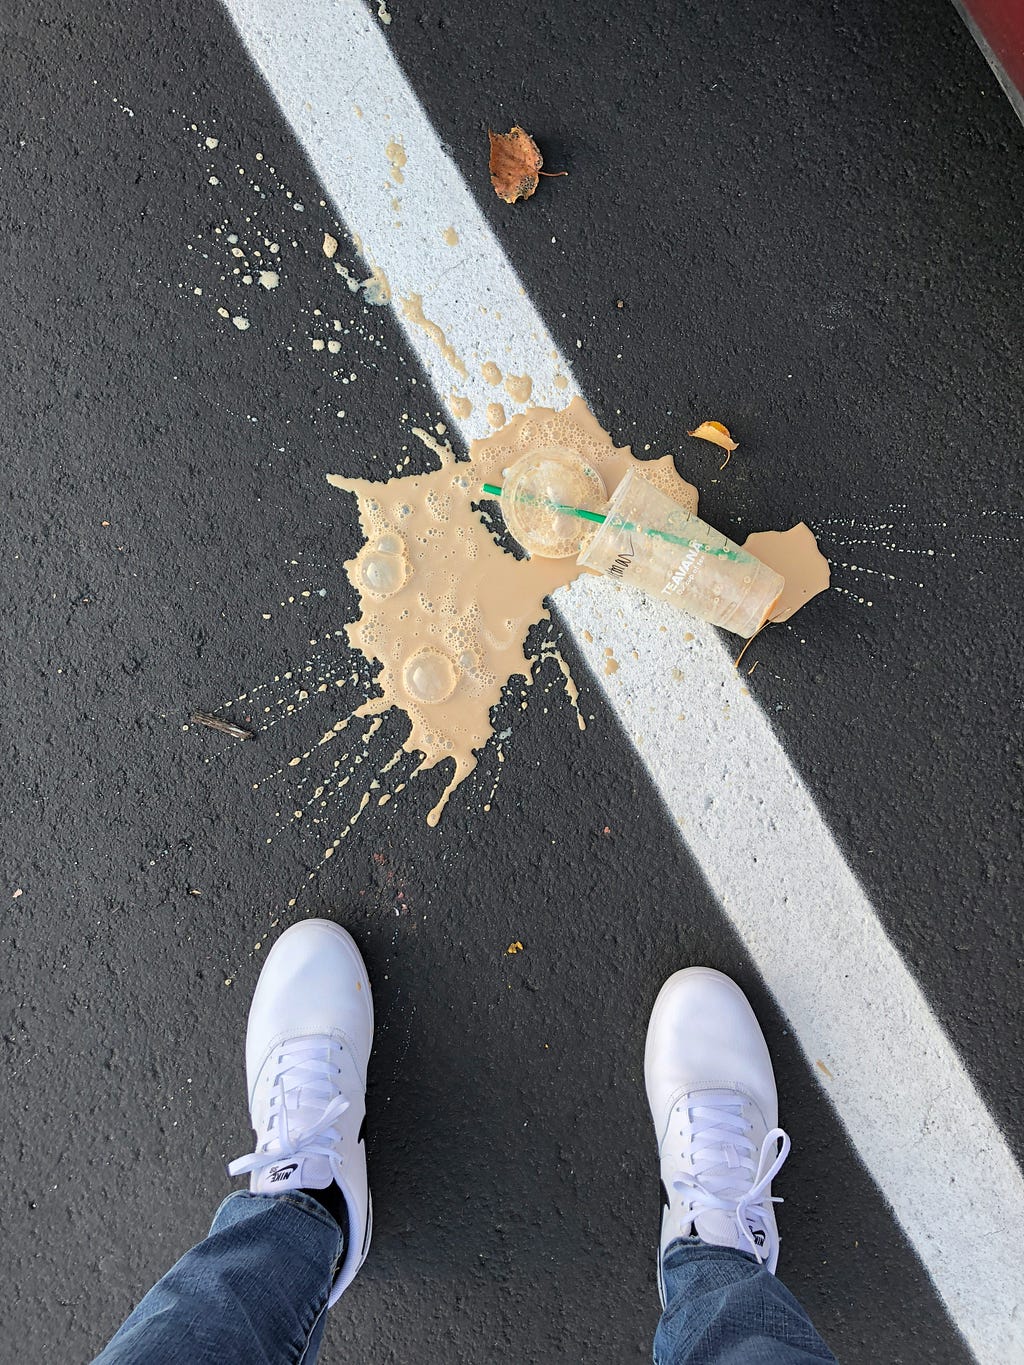 Staring at a cup of spilled coffee reflecting my feelings.